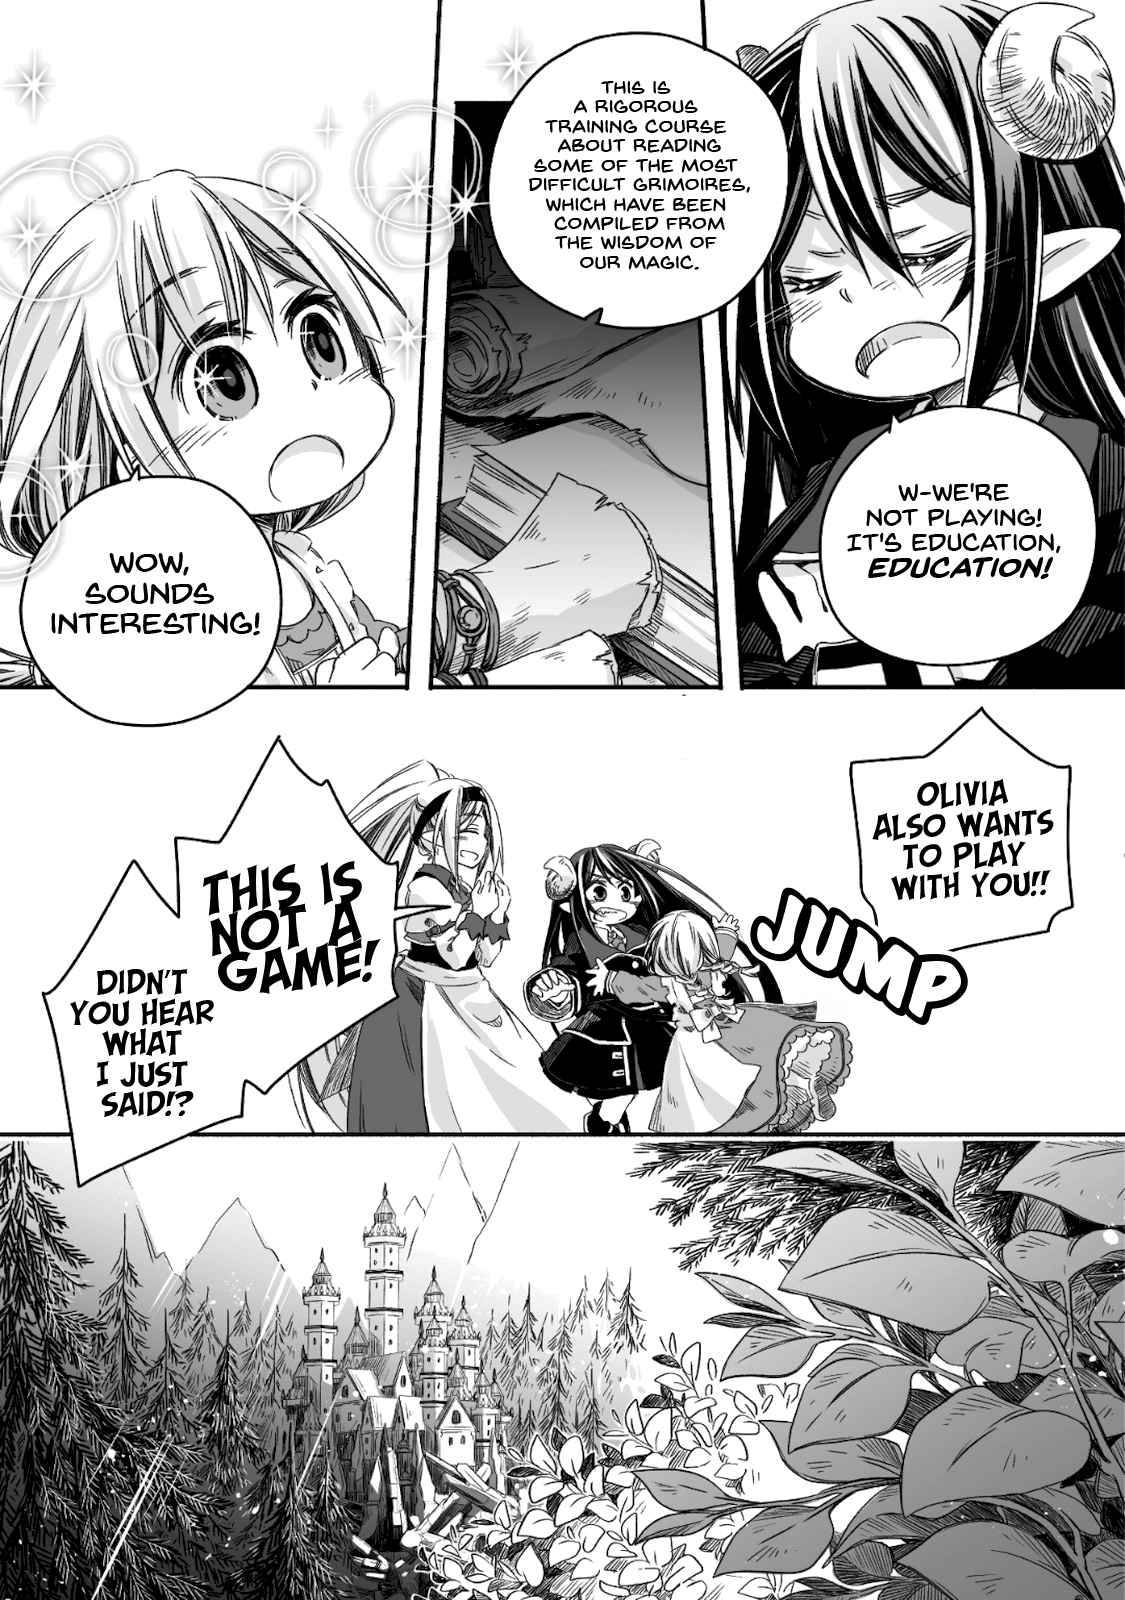 Parenting Diary Of The Strongest Dragon Who Suddenly Became A Dad ～ Cute Daughter, Heartwarming And Growing Up To Be The Strongest In The Human World ～ - chapter 6 - #6